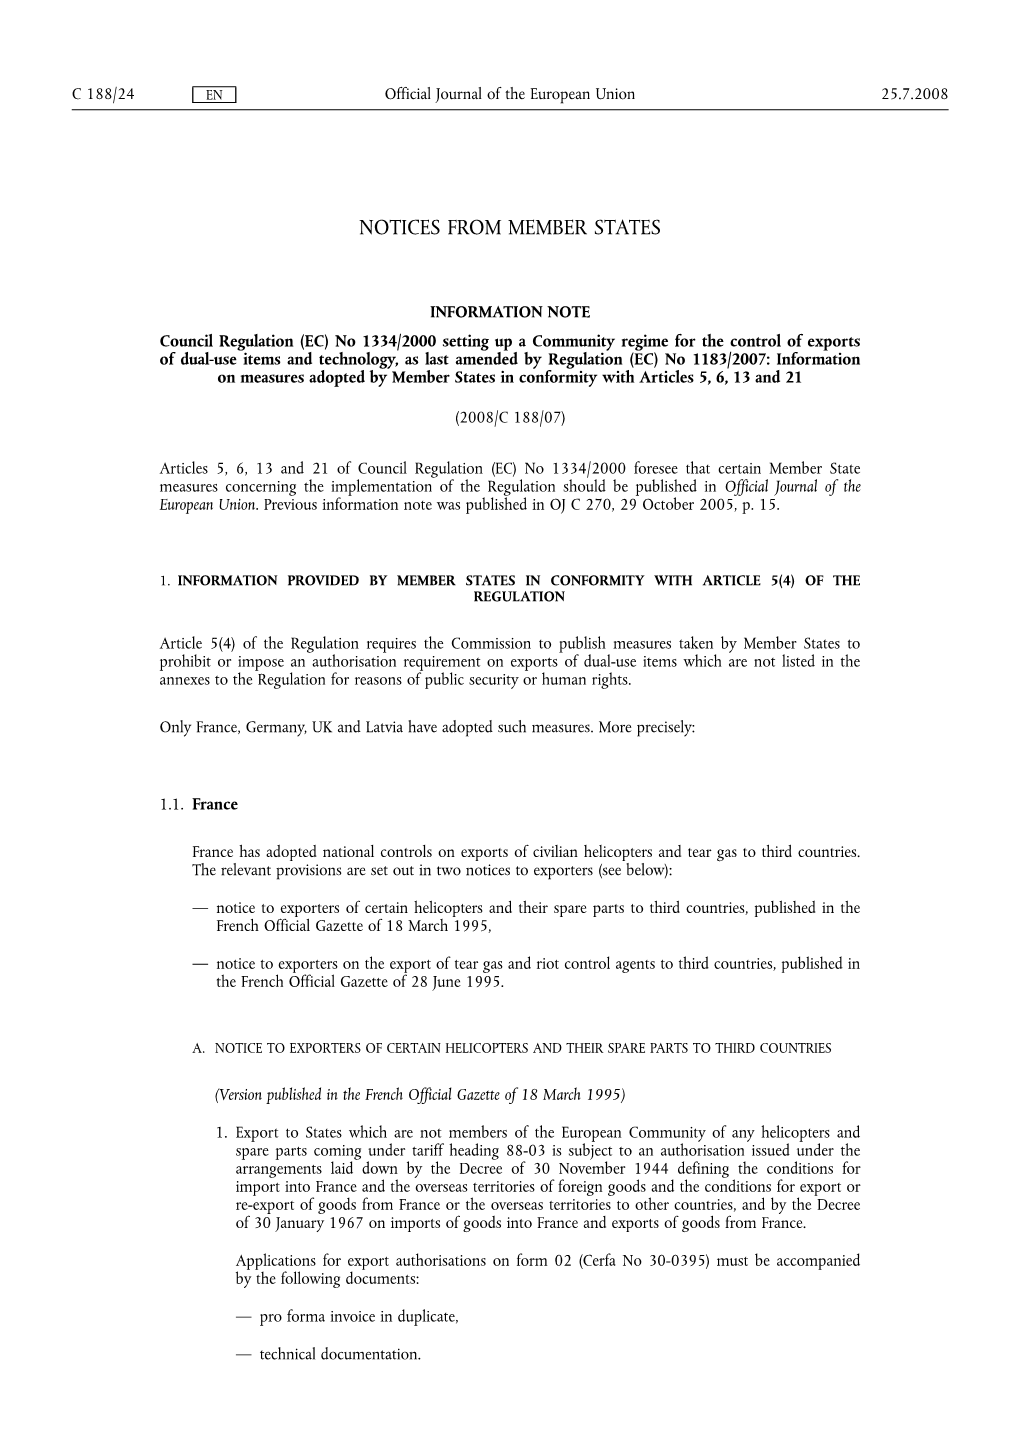 Notices from Member States